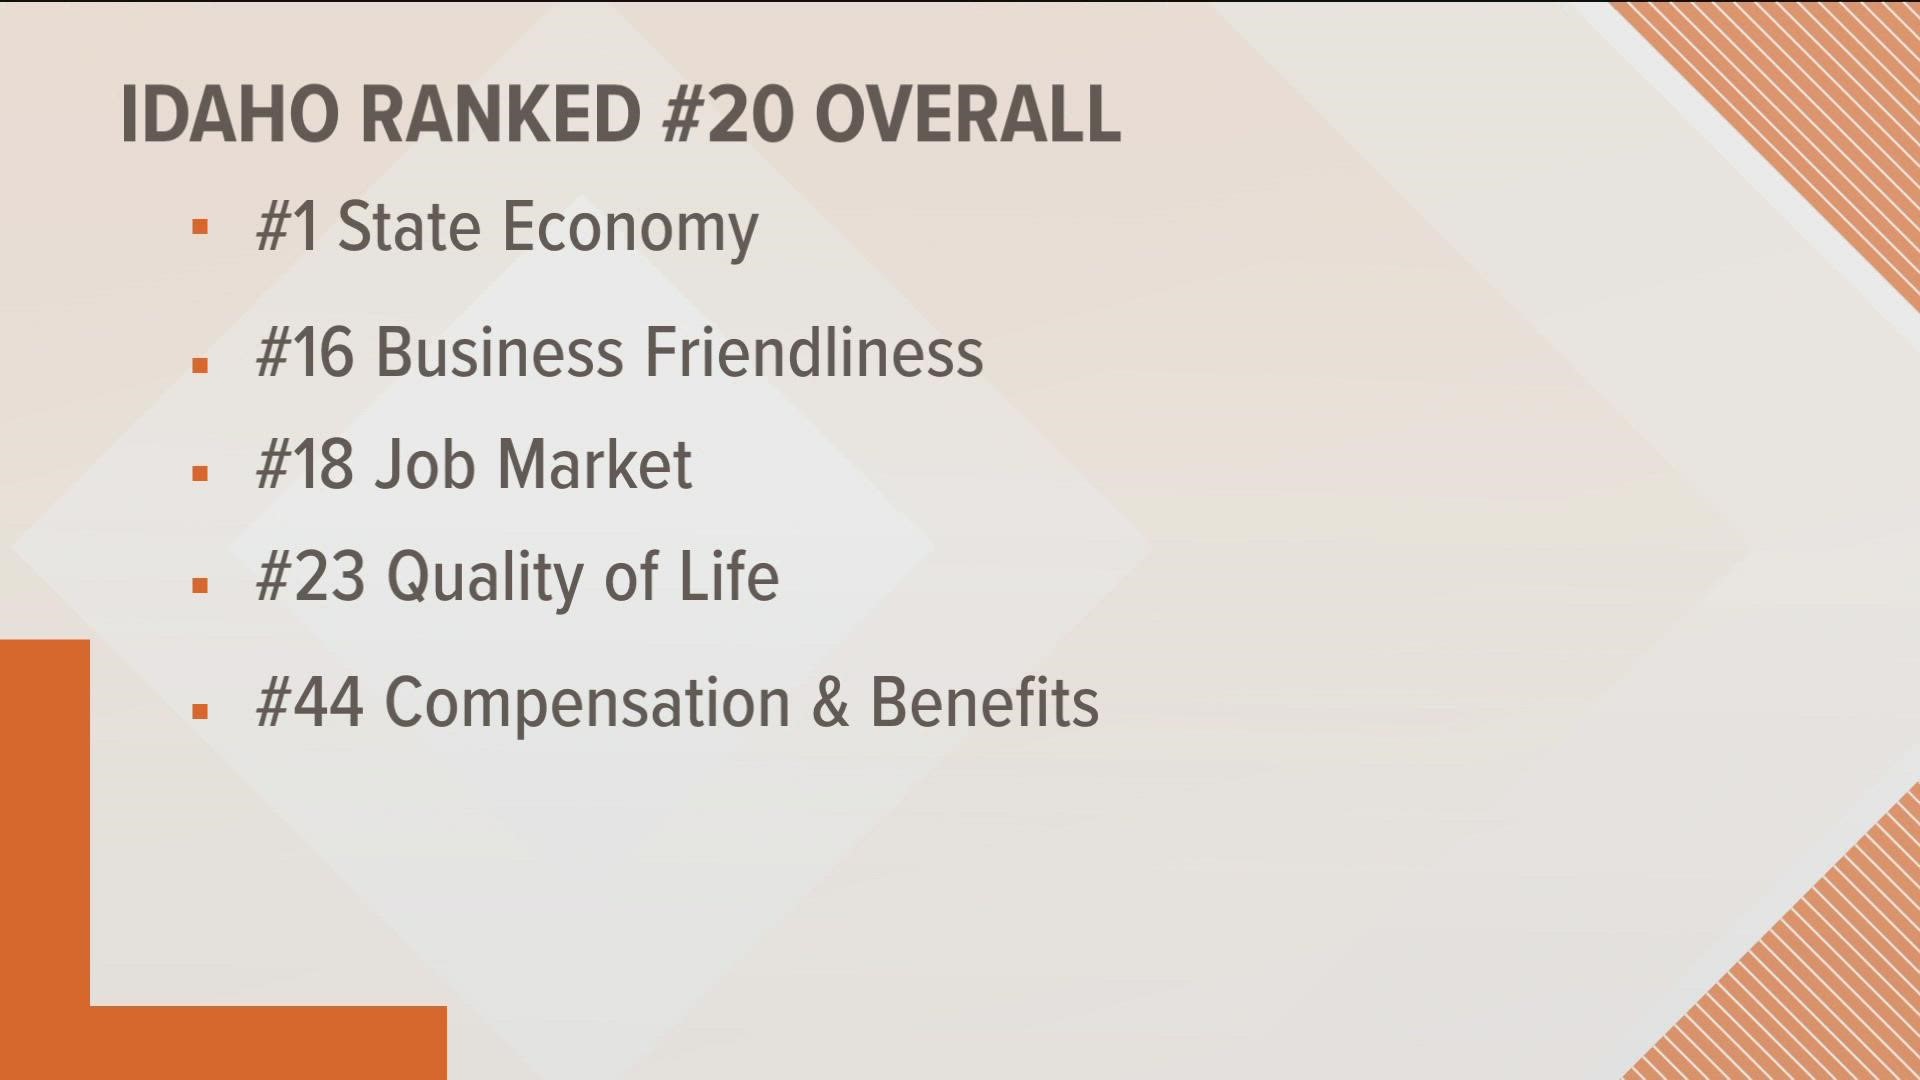 The data was based on5 key indicators of satisfaction and opportunity: business friendliness, quality of life, compensation, benefits, and state economy.